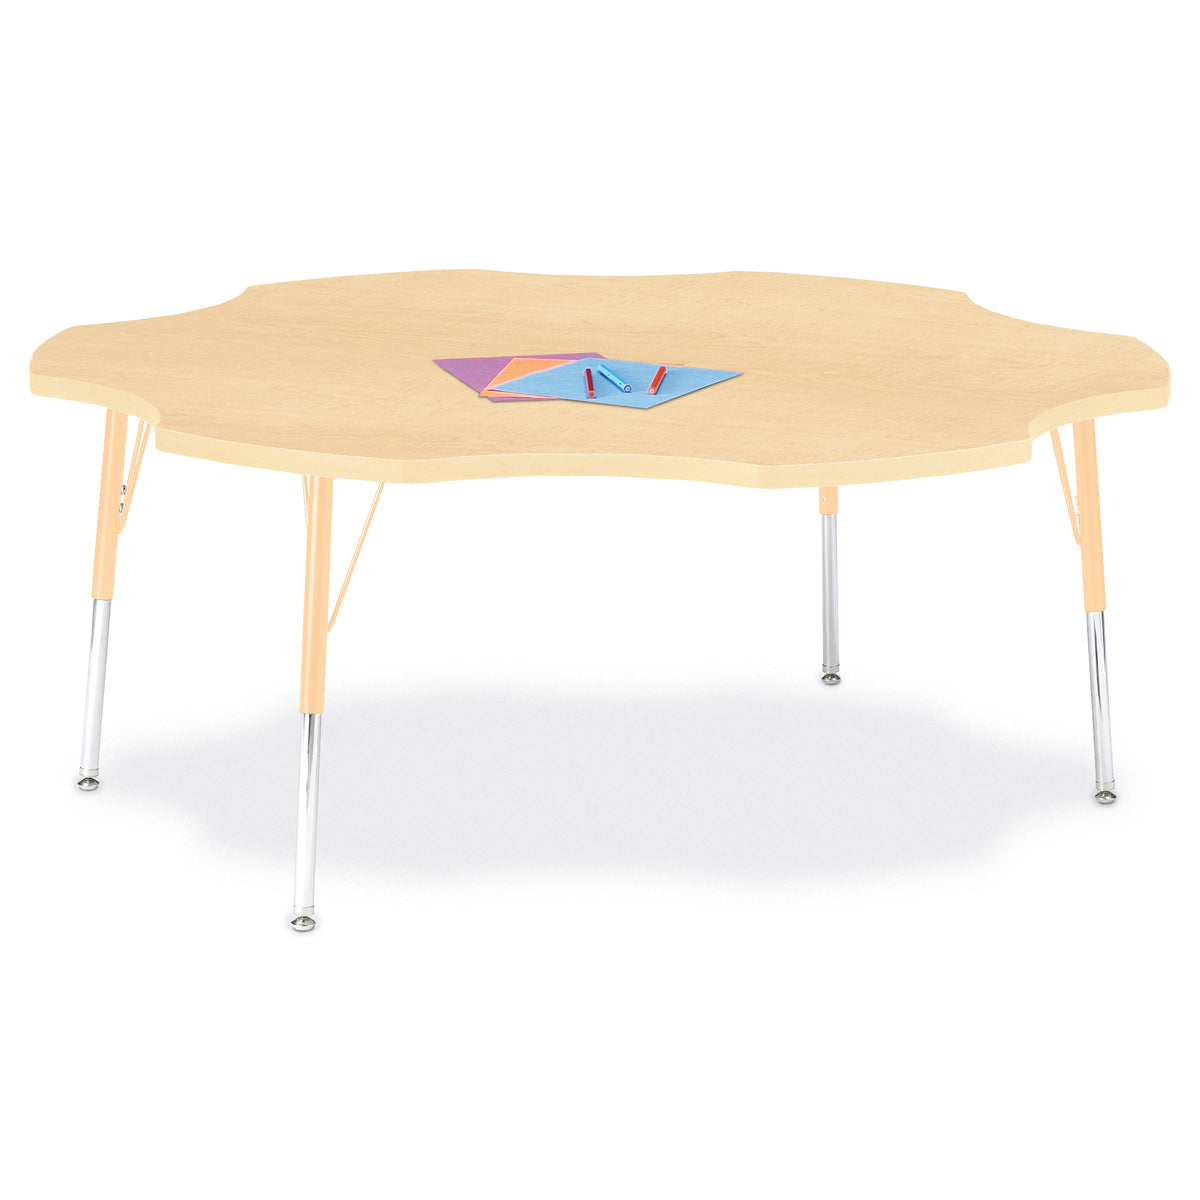 6458JCA251, Berries Six Leaf Activity Table - 60", A-height - Maple/Maple/Camel